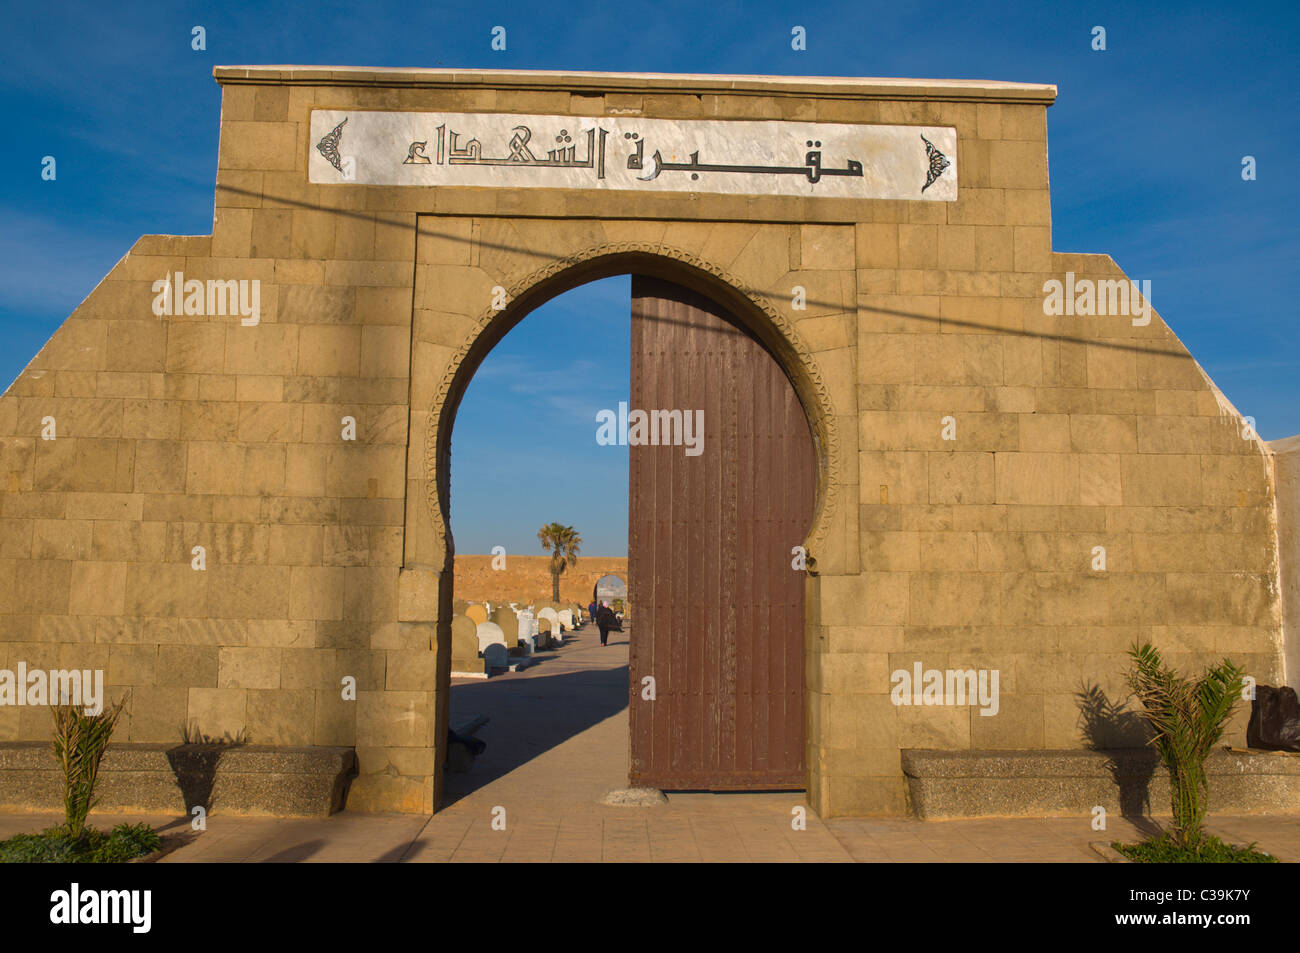 Gate to Cimitiere Al Shouhada Cemetery by the seaside Rabat the capital of Morocco Africa Stock Photo